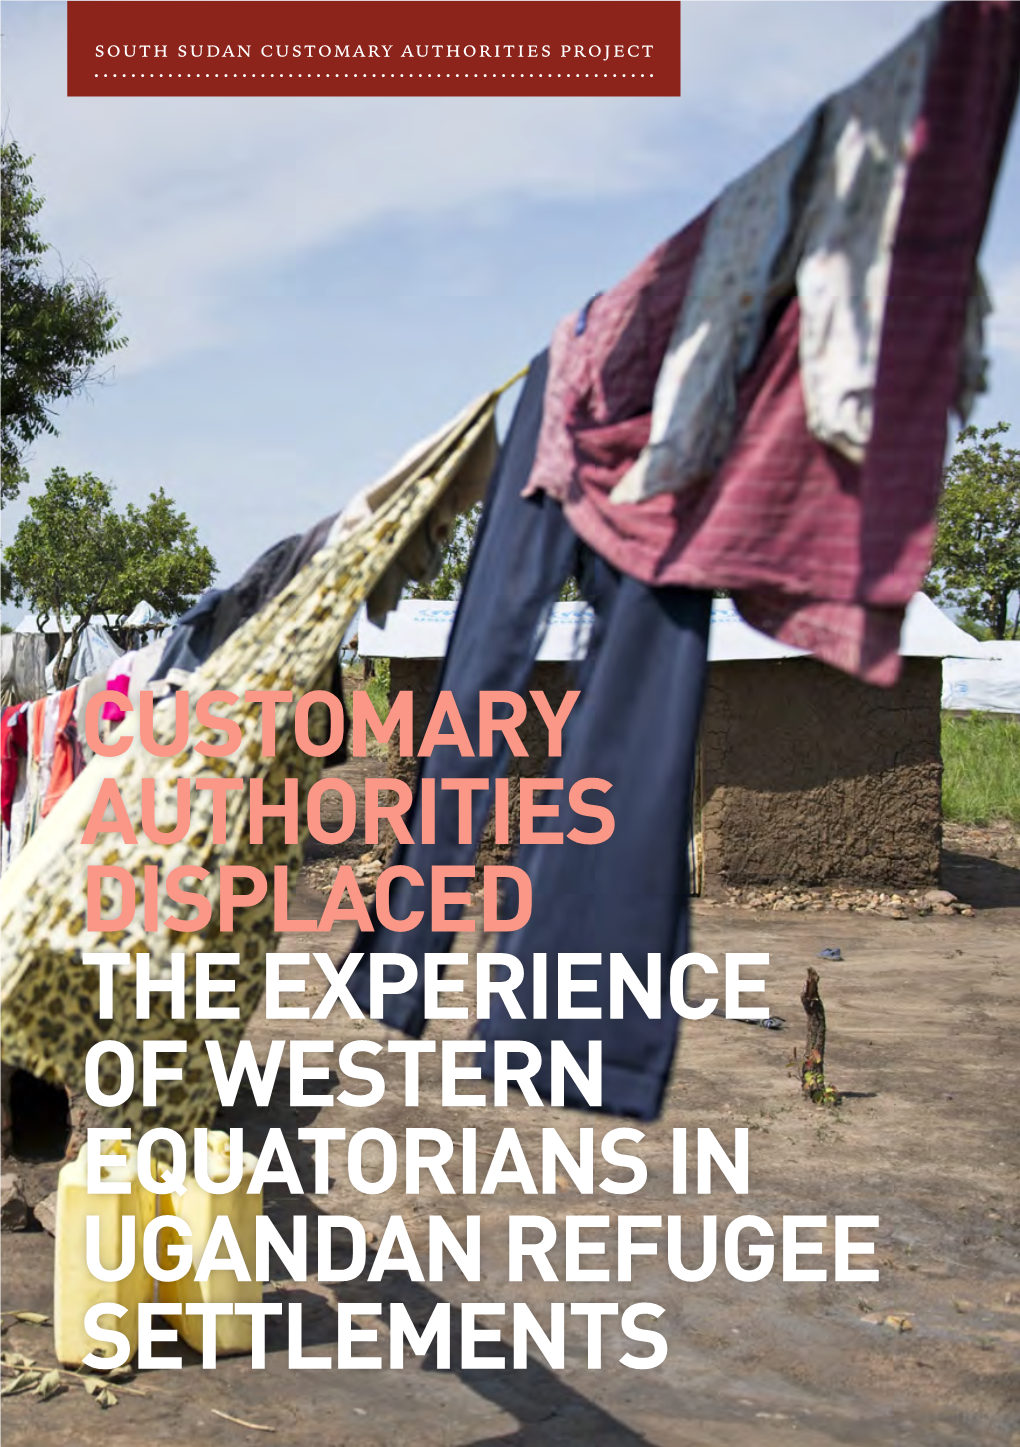 The Experience of Western Equatorians in Ugandan Refugee Settlements South Sudan Customary Authorities Project